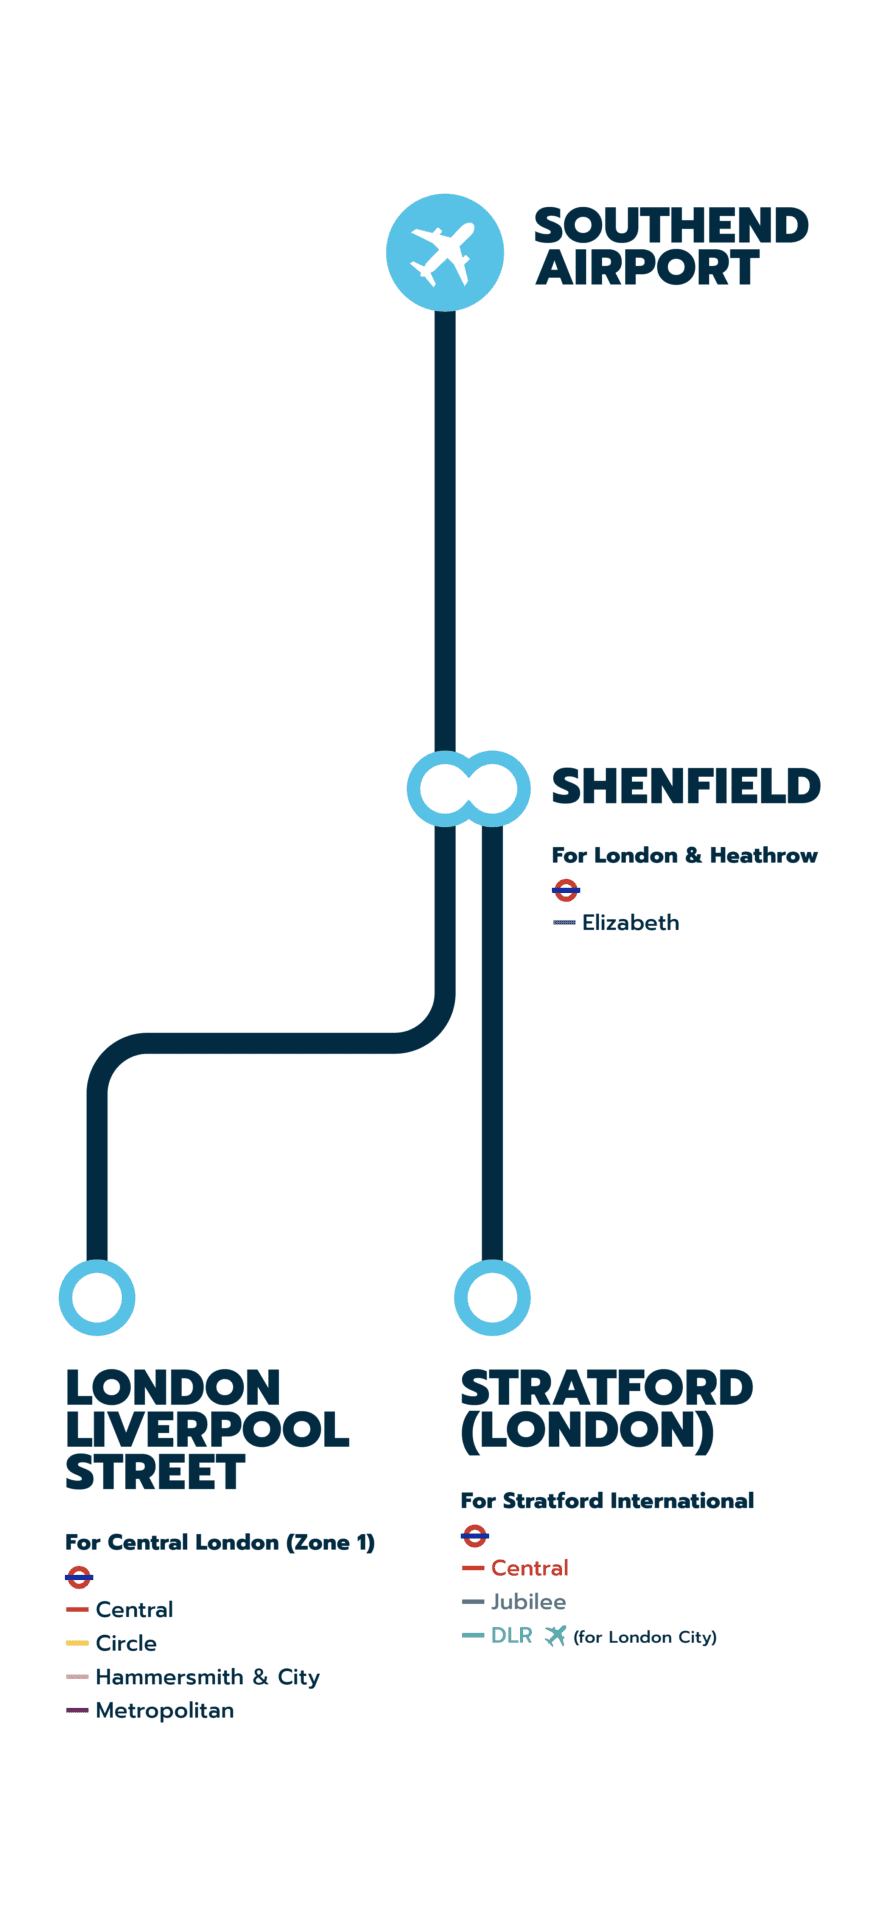 Rail connectivity from Southend Airport to Central London via Stratford or London Liverpool Street